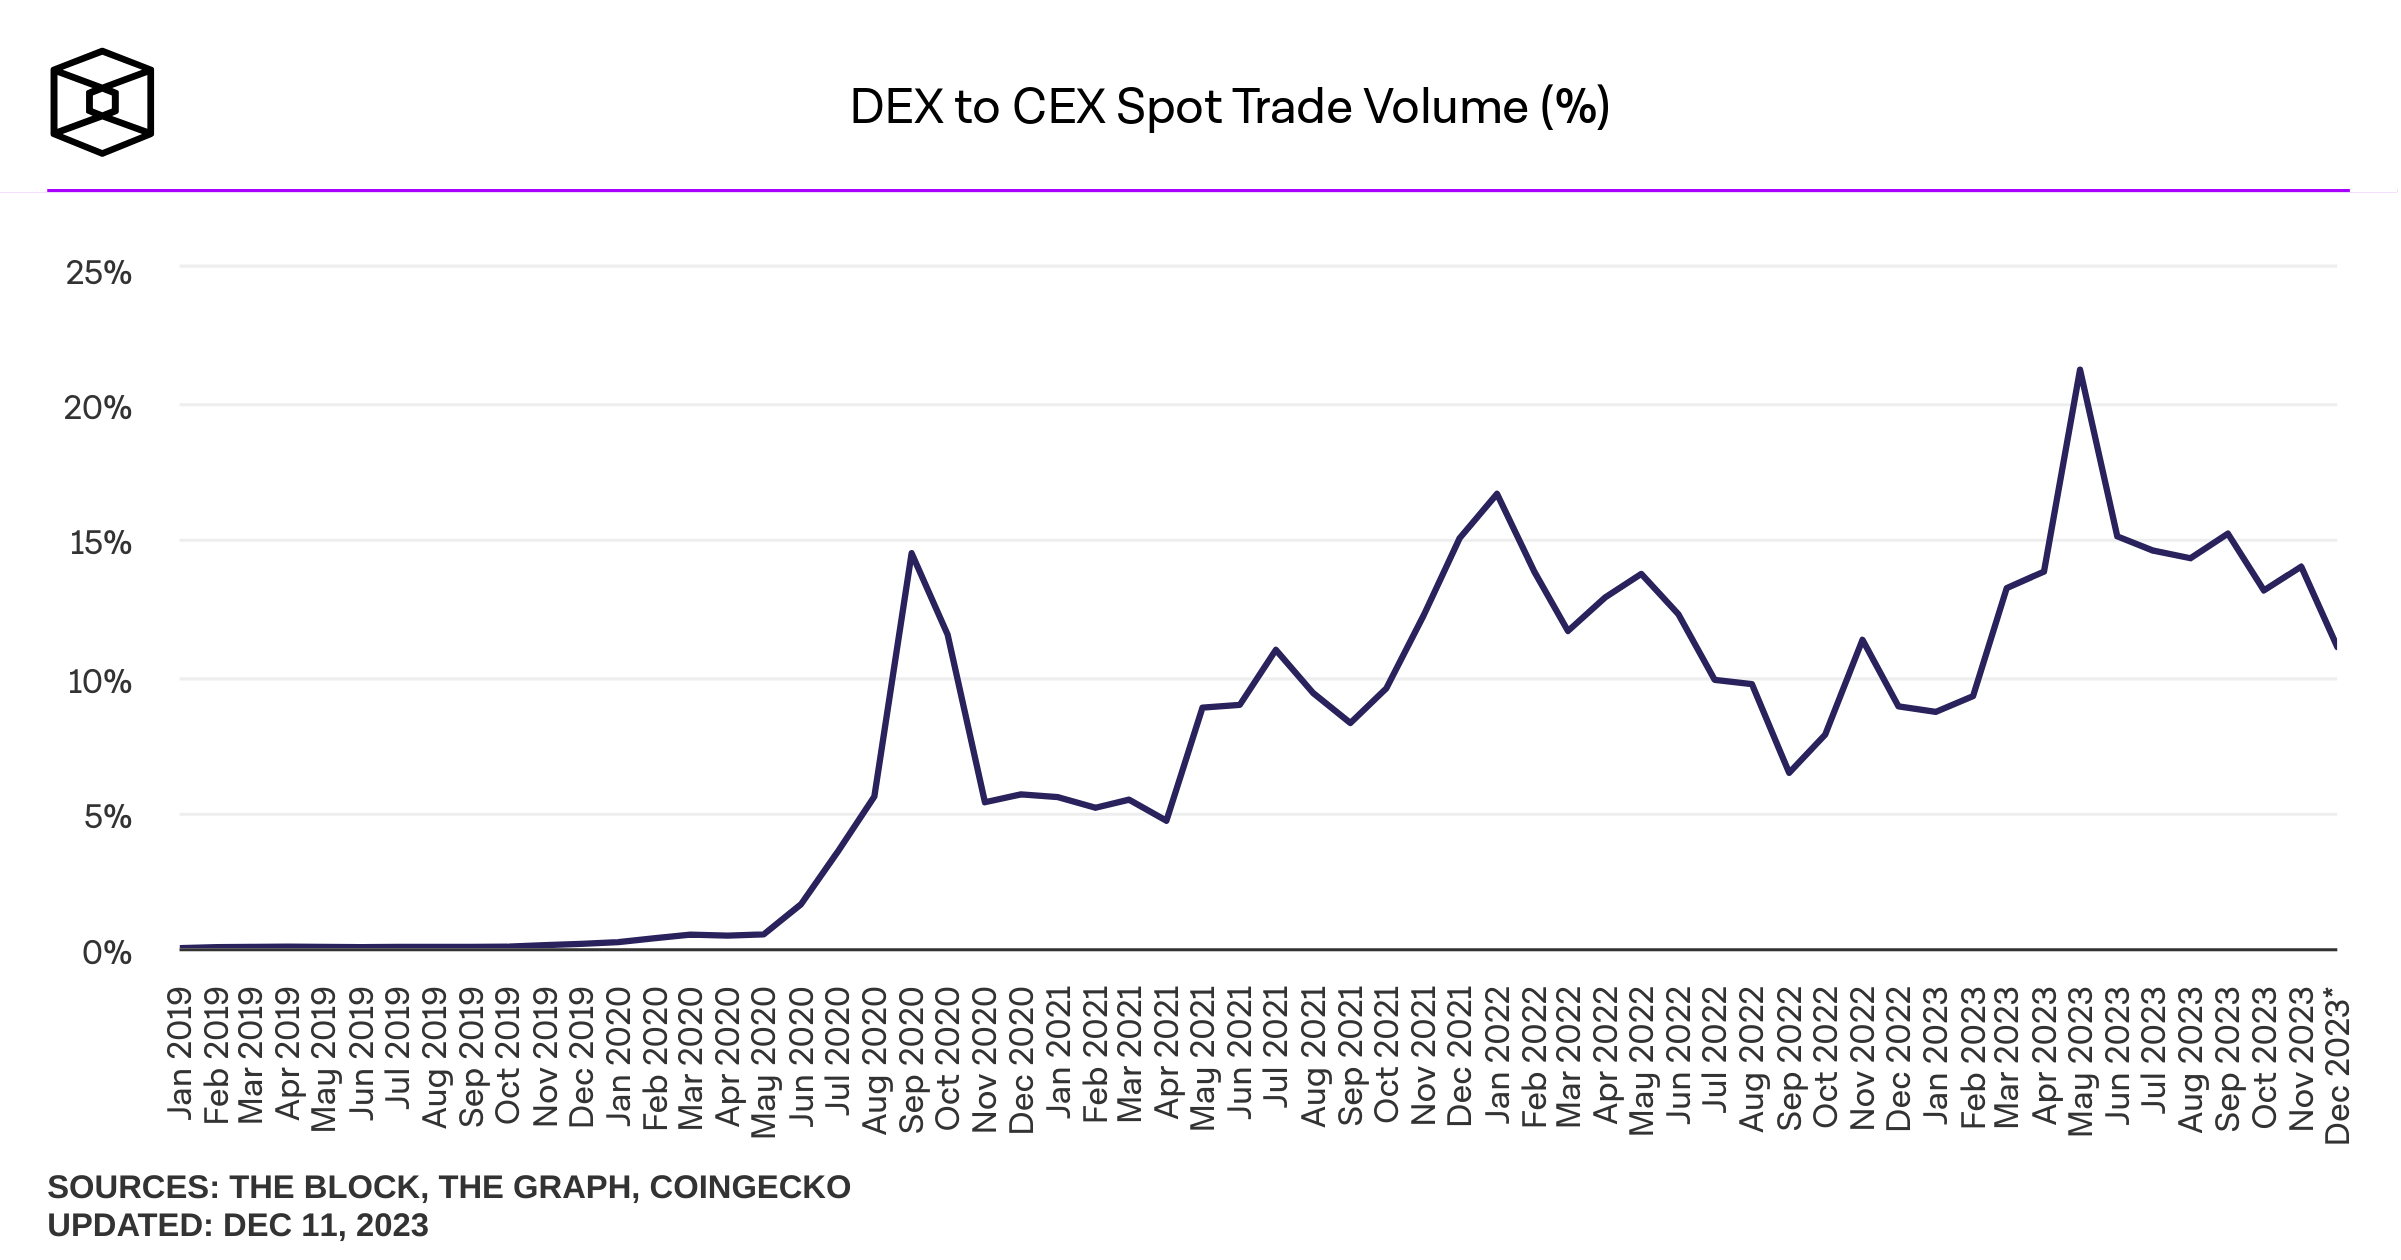 A graph of DEX to CEX spot trade volume from the Block.